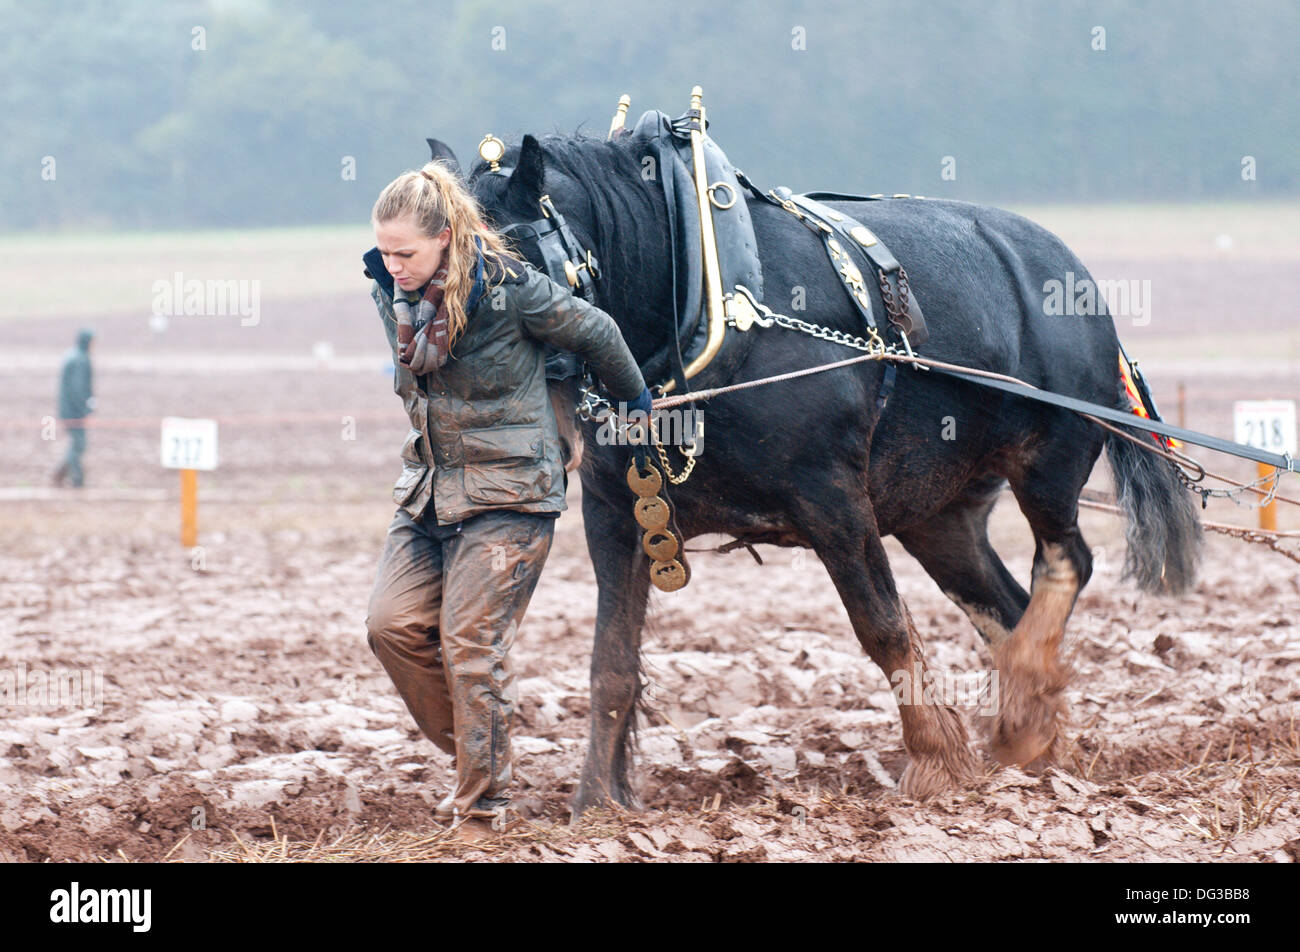 Llanwarne, Herefordshire, UK. 13th October 2013. 24-year-old graduate Gemma Schofield from Ulster, Warwickshire - working for NFU -  handles Carolyn, a shire horse, for retired farmer and experienced plough lady Jane Muntz-Torres in muddy conditions during the Class 13 Horse Ploughing – Oat Seed Furrow event at the British National Ploughing Championships. The top ploughmen/women of  each class (reversible and conventional) will represent Britain at the World Ploughing Championships to be held in France in 2014. Photo credit: Graham M. Lawrence/Alamy Live News. Stock Photo